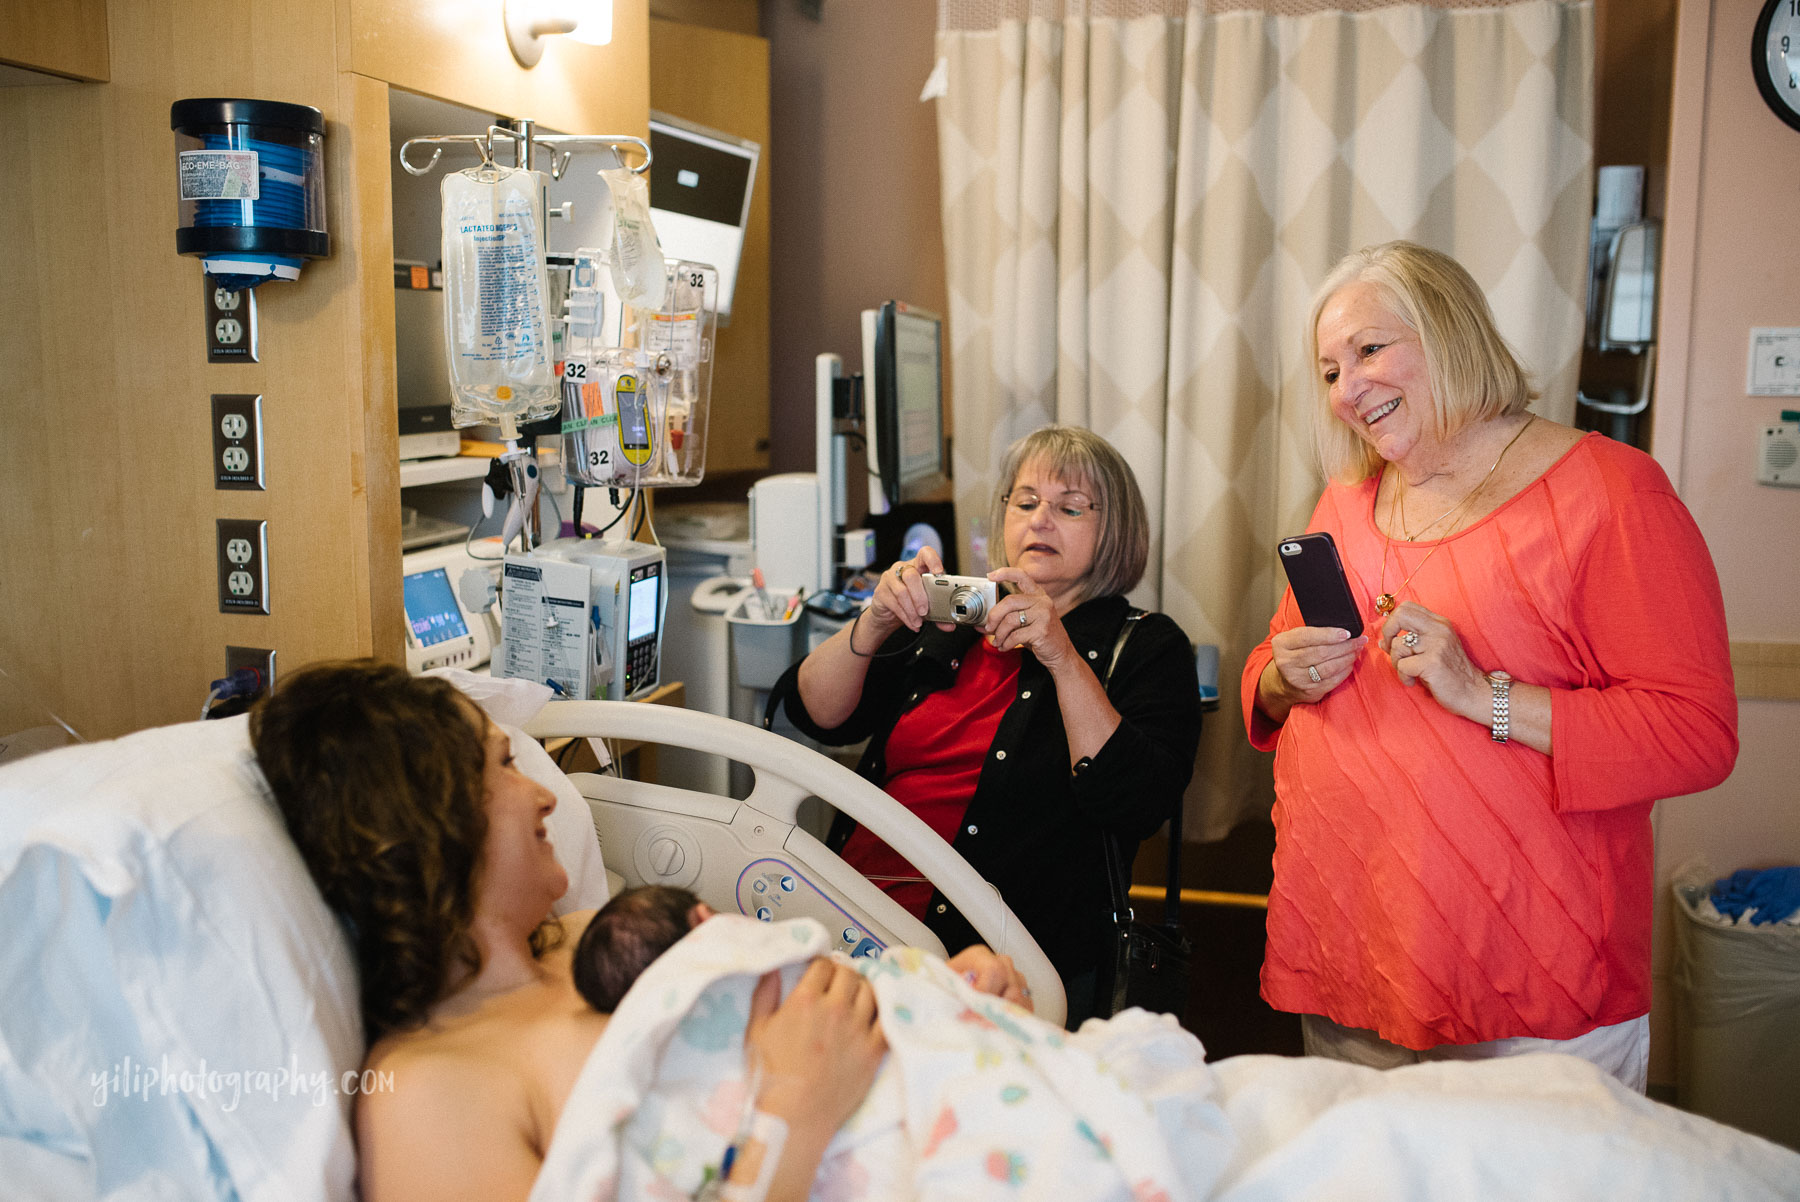 two grandmothers taking photos of their granddaughter after birth in hospital room